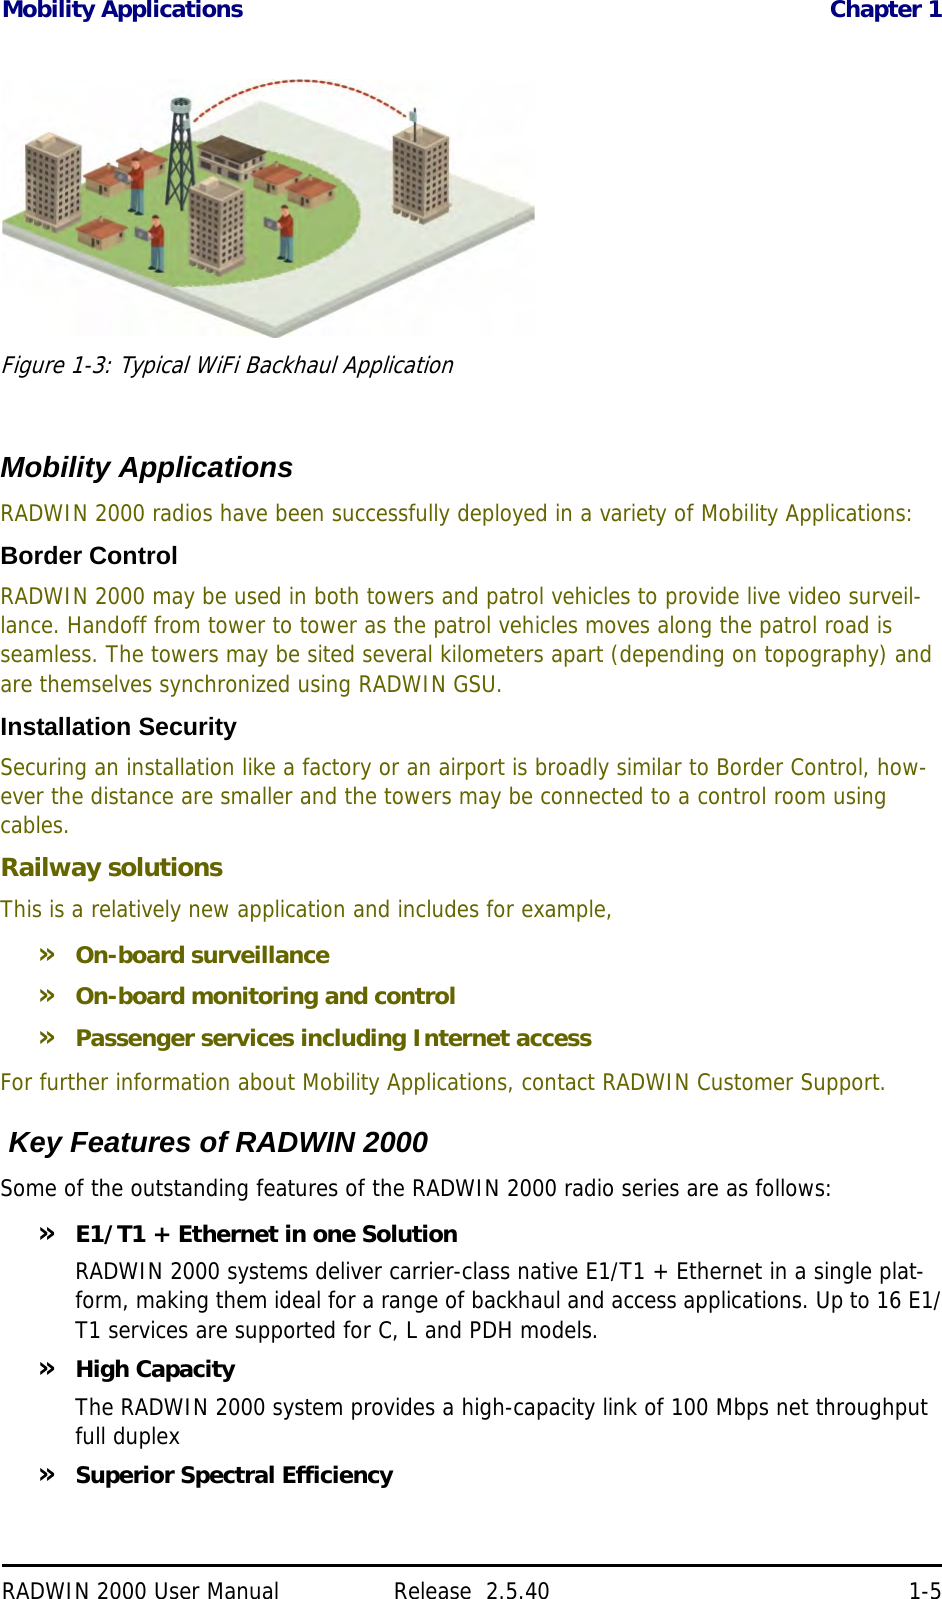 Mobility Applications Chapter 1RADWIN 2000 User Manual Release  2.5.40 1-5Figure 1-3: Typical WiFi Backhaul ApplicationMobility ApplicationsRADWIN 2000 radios have been successfully deployed in a variety of Mobility Applications:Border ControlRADWIN 2000 may be used in both towers and patrol vehicles to provide live video surveil-lance. Handoff from tower to tower as the patrol vehicles moves along the patrol road is seamless. The towers may be sited several kilometers apart (depending on topography) and are themselves synchronized using RADWIN GSU.Installation SecuritySecuring an installation like a factory or an airport is broadly similar to Border Control, how-ever the distance are smaller and the towers may be connected to a control room using cables.Railway solutionsThis is a relatively new application and includes for example,»On-board surveillance»On-board monitoring and control»Passenger services including Internet accessFor further information about Mobility Applications, contact RADWIN Customer Support. Key Features of RADWIN 2000Some of the outstanding features of the RADWIN 2000 radio series are as follows:»E1/T1 + Ethernet in one SolutionRADWIN 2000 systems deliver carrier-class native E1/T1 + Ethernet in a single plat-form, making them ideal for a range of backhaul and access applications. Up to 16 E1/T1 services are supported for C, L and PDH models.»High CapacityThe RADWIN 2000 system provides a high-capacity link of 100 Mbps net throughput full duplex»Superior Spectral Efficiency